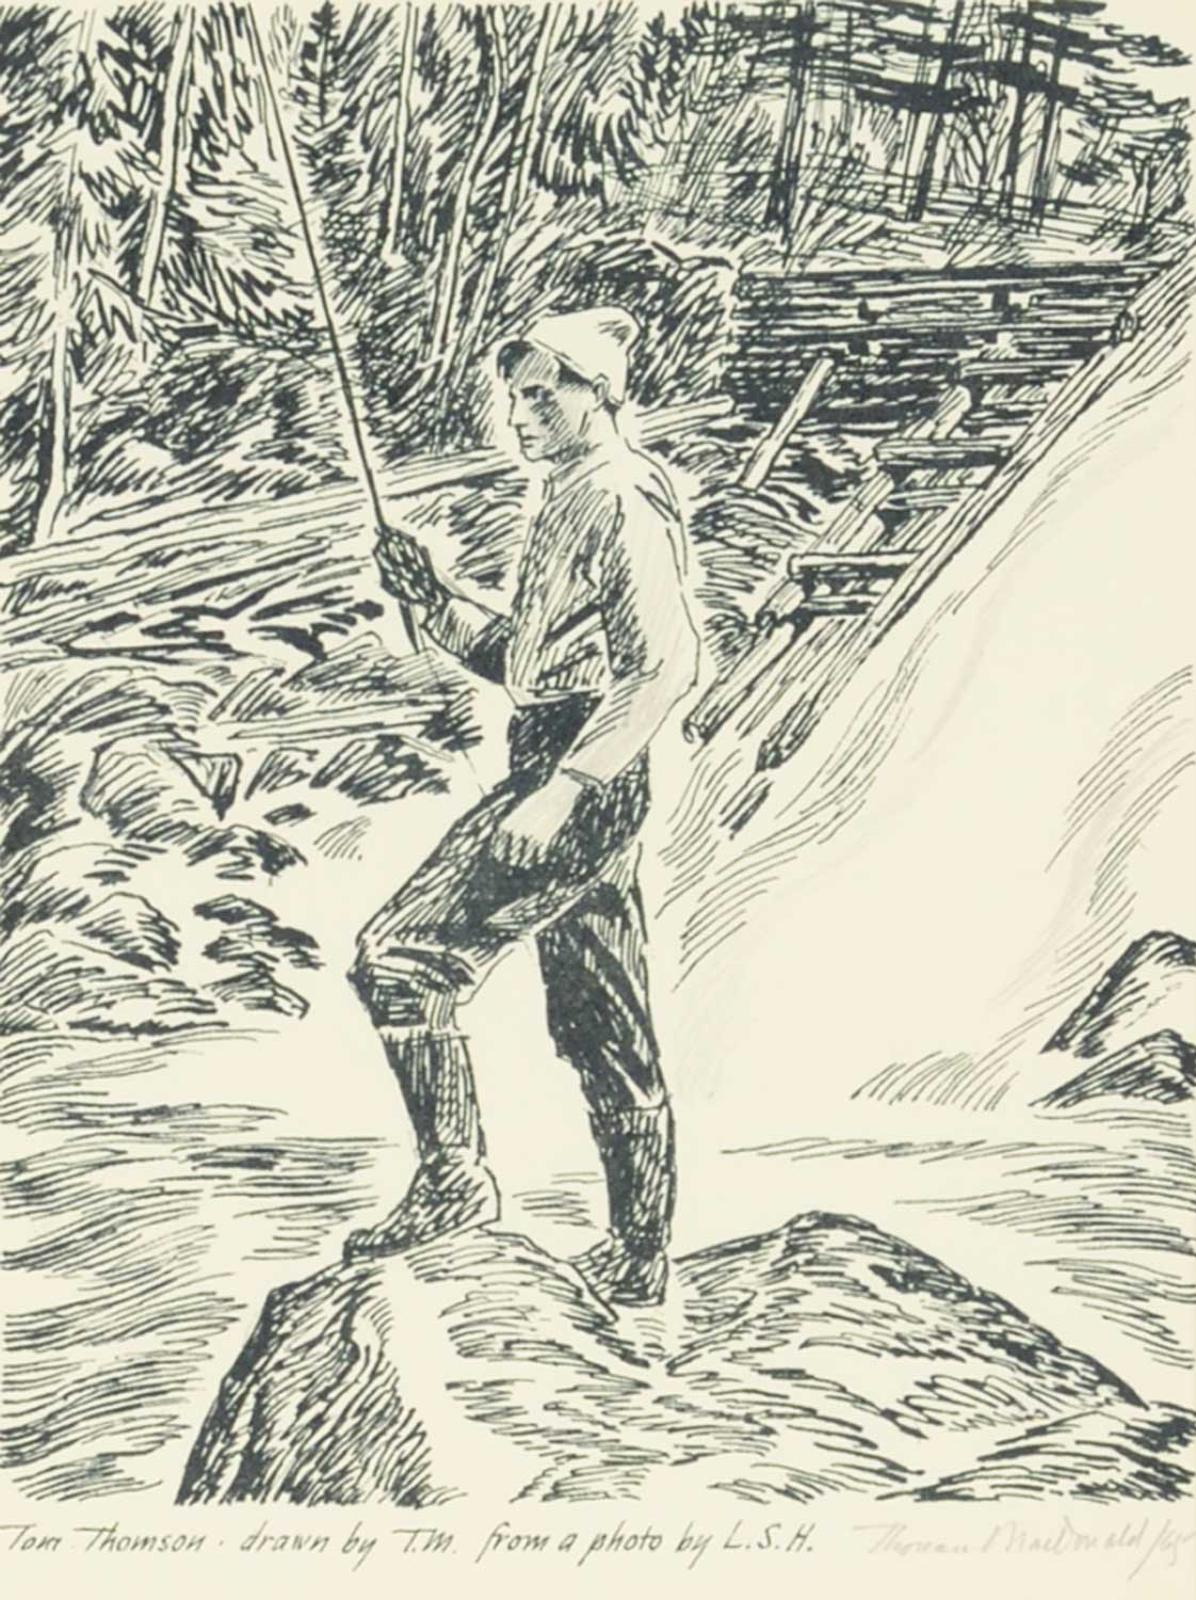 Thoreau MacDonald (1901-1989) - Tom Thomson, Drawn by T.M. from a photo by L.S.H.